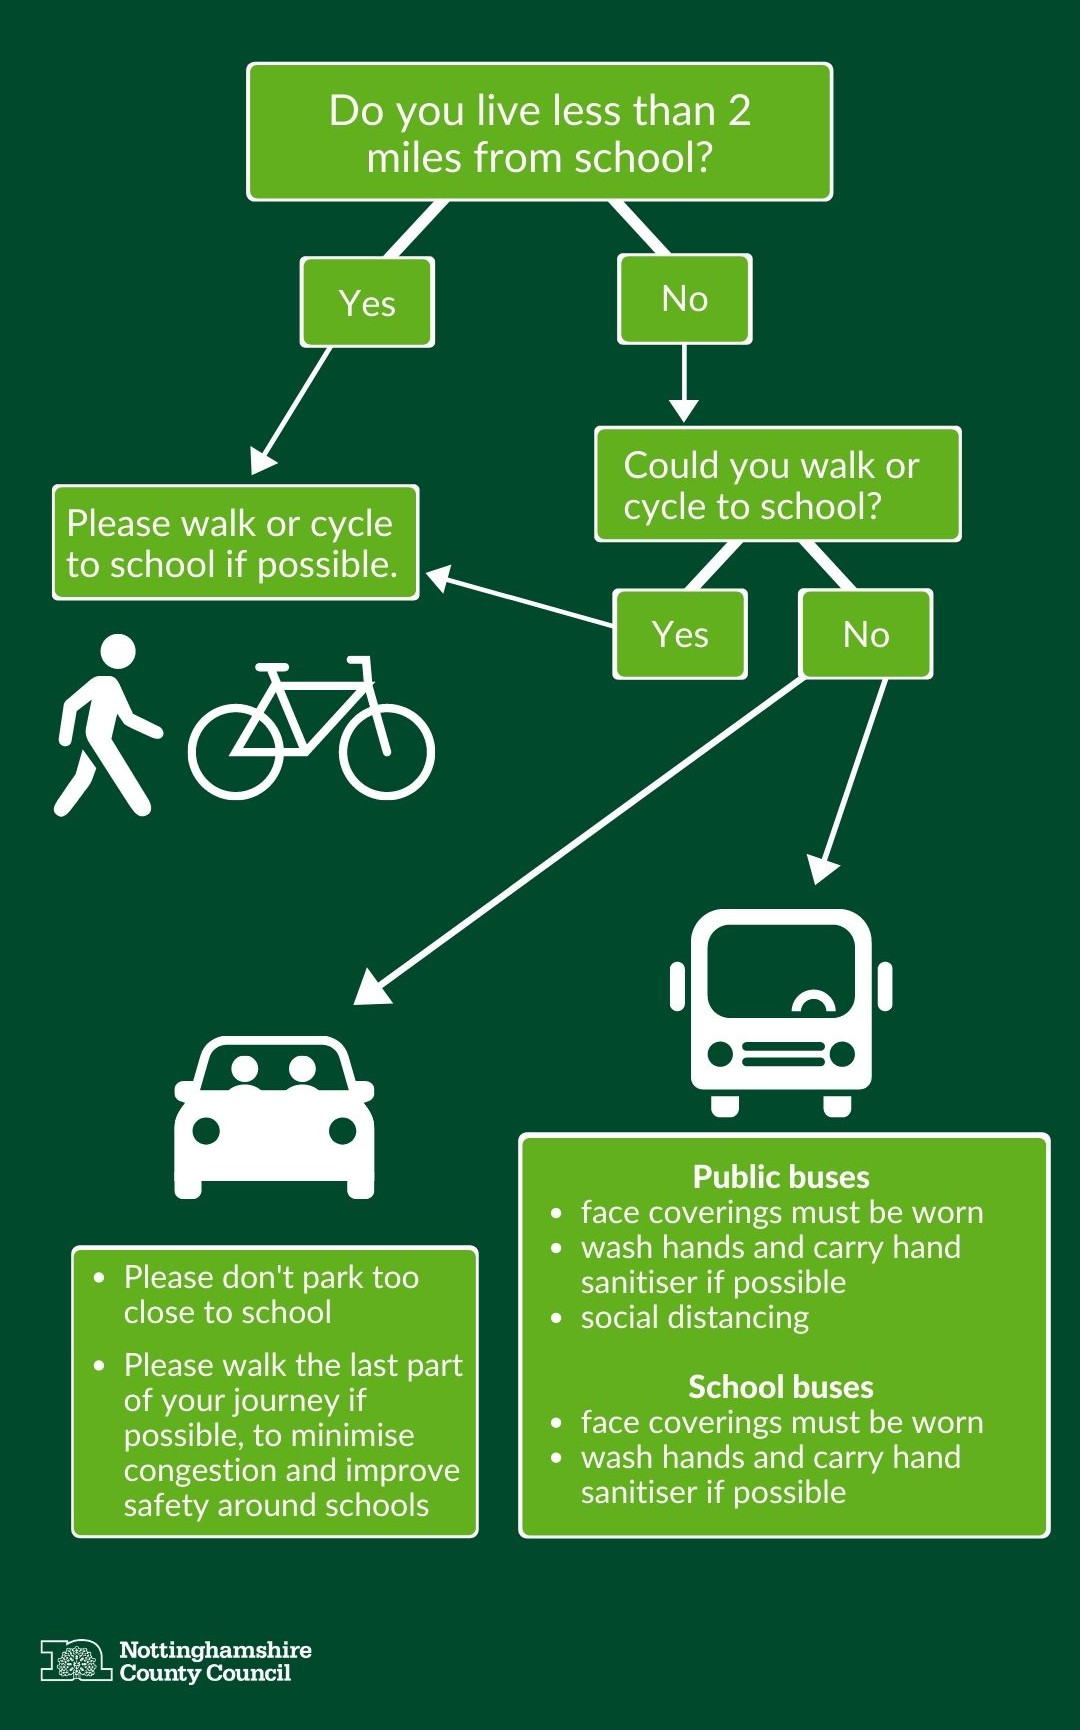 Getting to school: please walk or cycle if possible, especially if you live less than 2 miles away. If you do travel by car, please don't park too close to school. Please walk the last part of your journey if possible, to minimise congestion and improve safety around schools. Public buses: Face coverings should be worn. Wash hands and carry hand sanitiser if possible. Observe social distancing. School buses: Face coverings should be worn. Wash hands and carry hand sanitiser if possible.